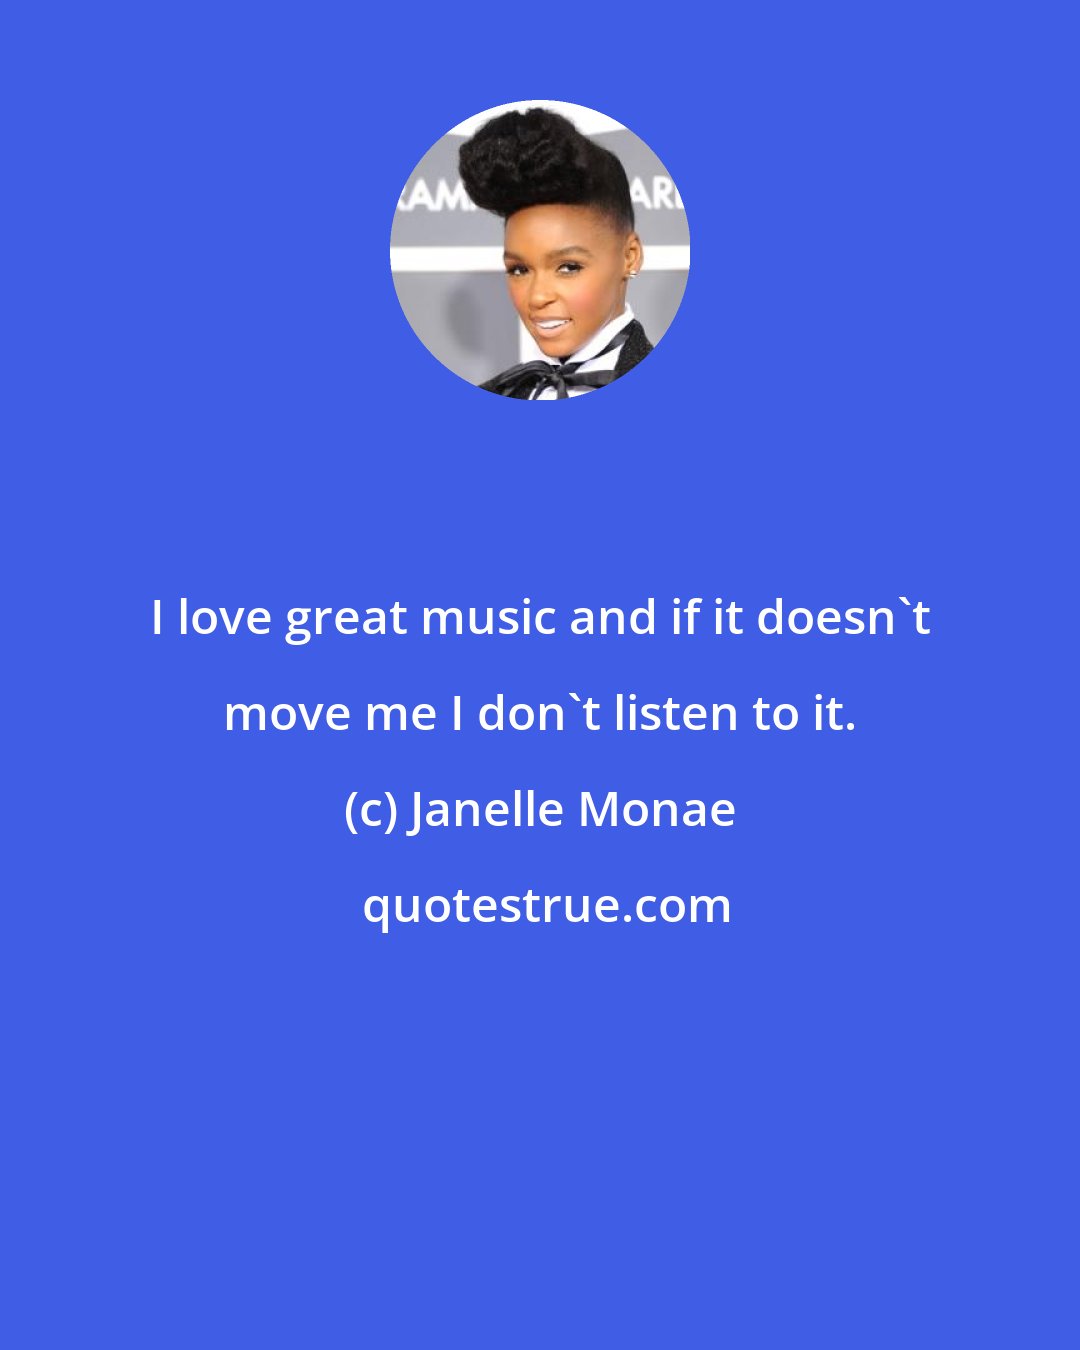 Janelle Monae: I love great music and if it doesn't move me I don't listen to it.